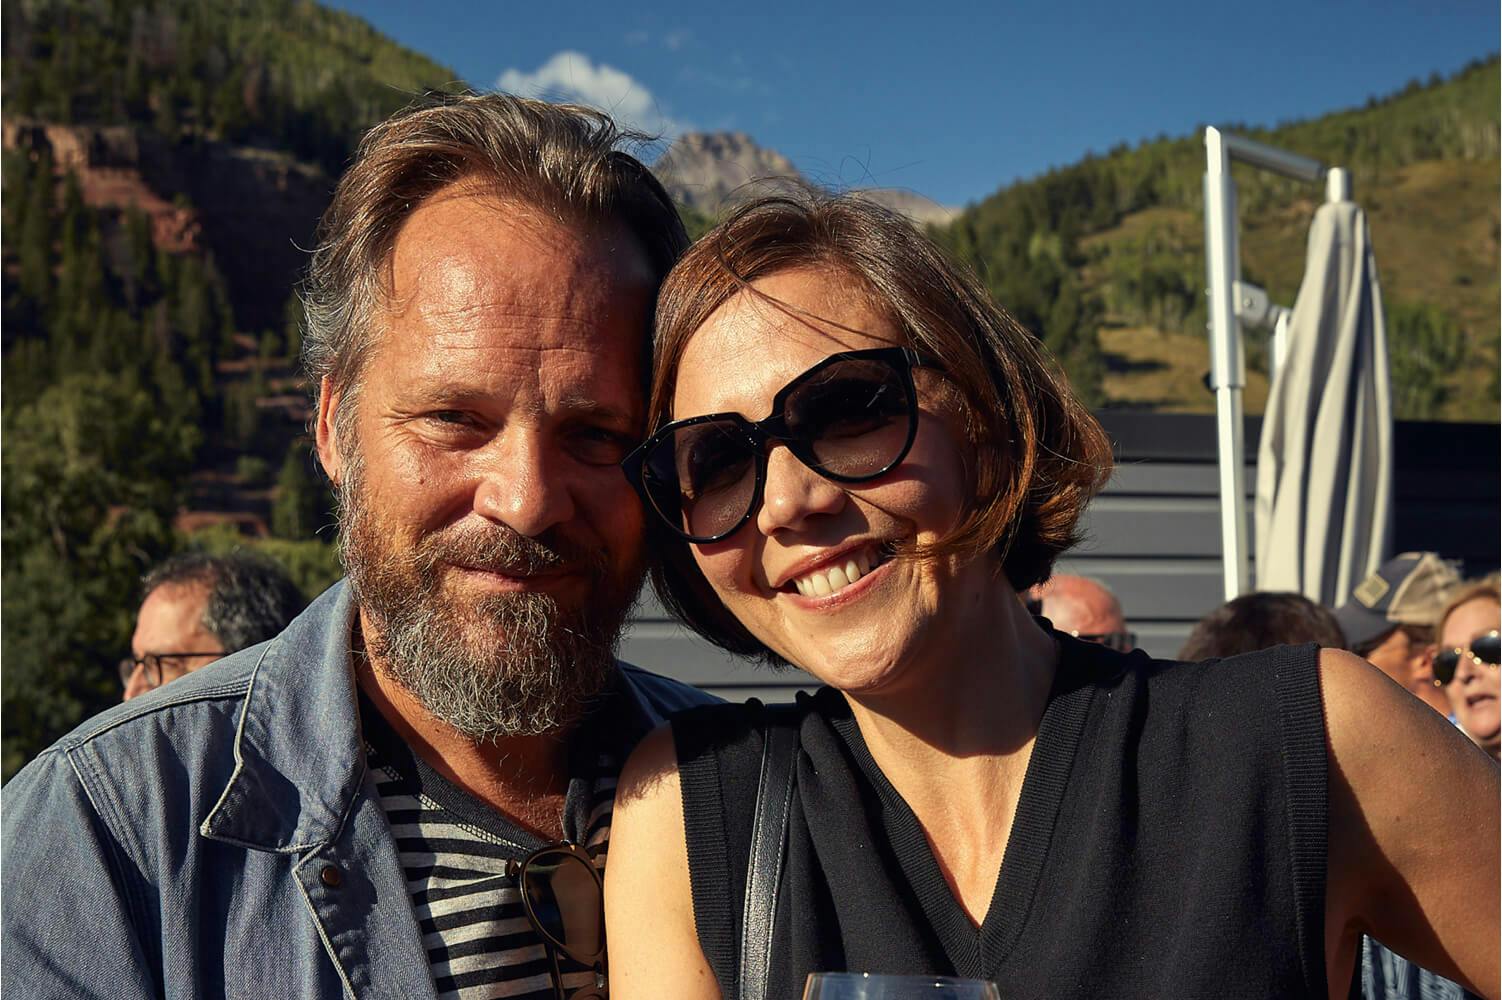 Maggie Gyllenhaal and Peter Sarsgaard at the Telluride Film Festival, 2021 wearing casual attire while standing at a rooftop event with the Colorado mountains in the background.